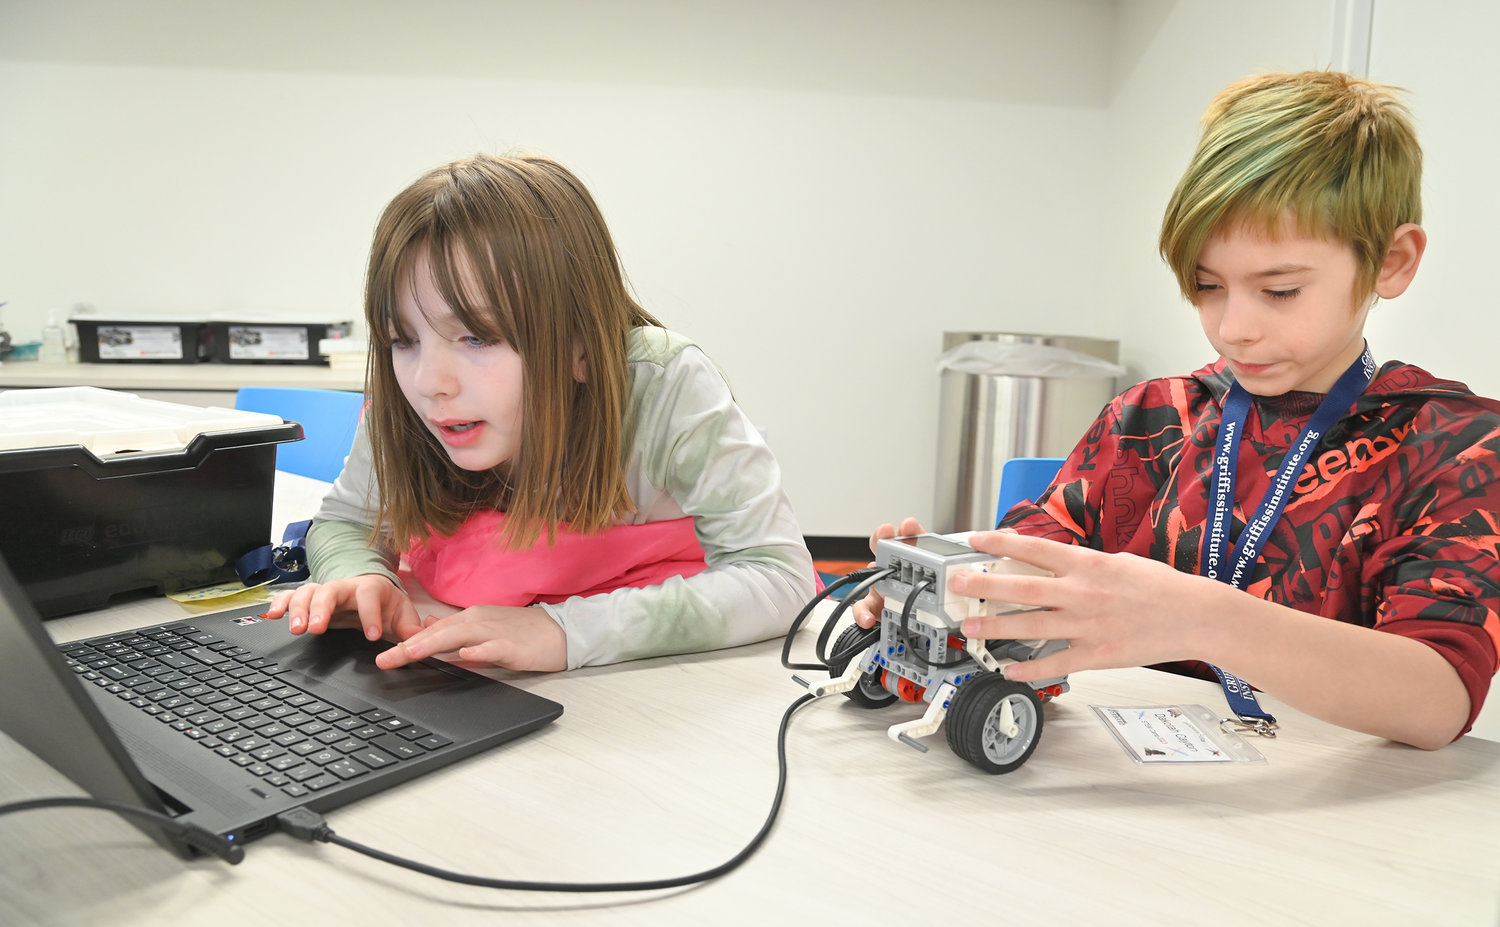 Bellamy Elementary School fourth graders Aubrey Stewart and Dakotah Cayton work on giving their LegoBot personality Tuesday, Feb. 21 at Griffiss Institute’s Robotics Camp in Rome.